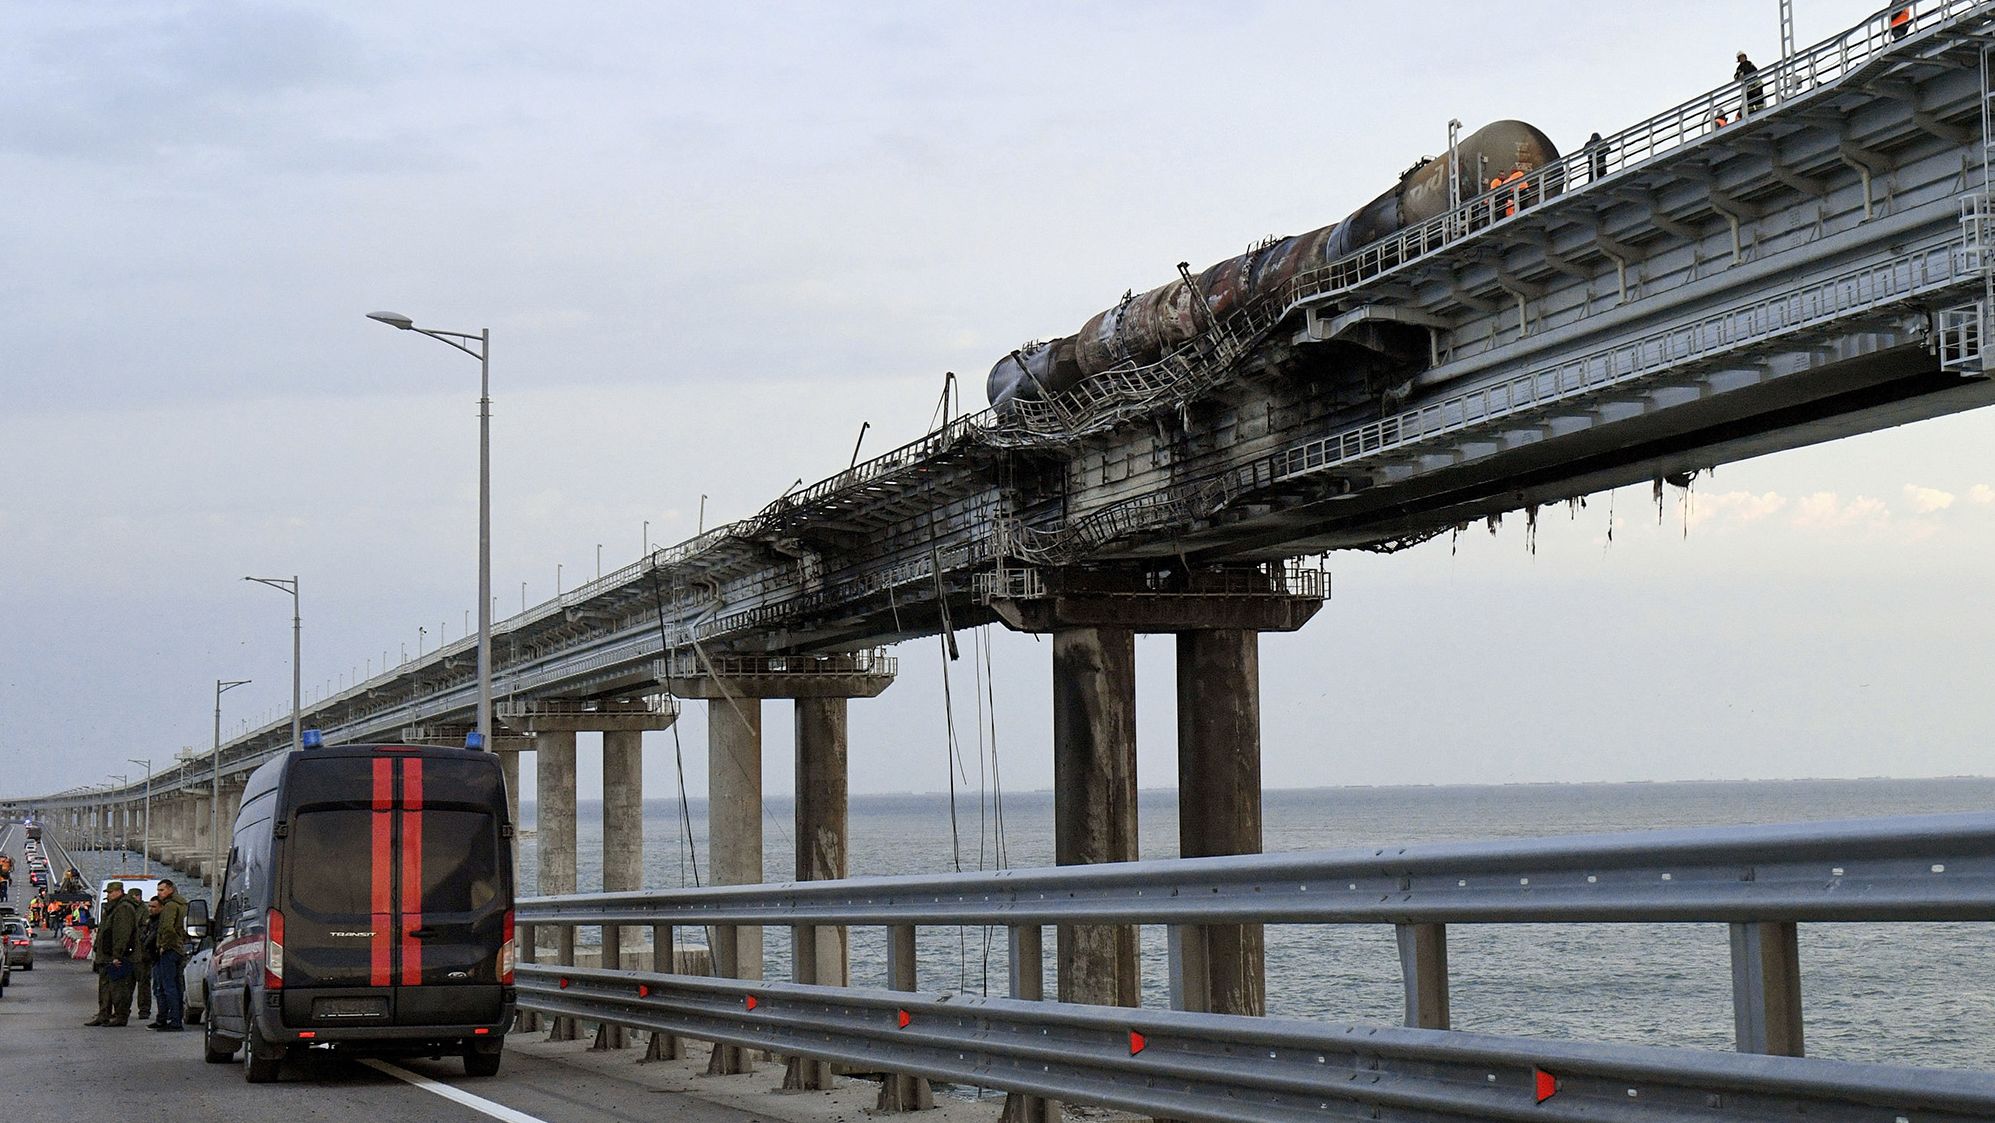 Road traffic resumed on the Crimea bridge, after it was severely disrupted following the blast. 